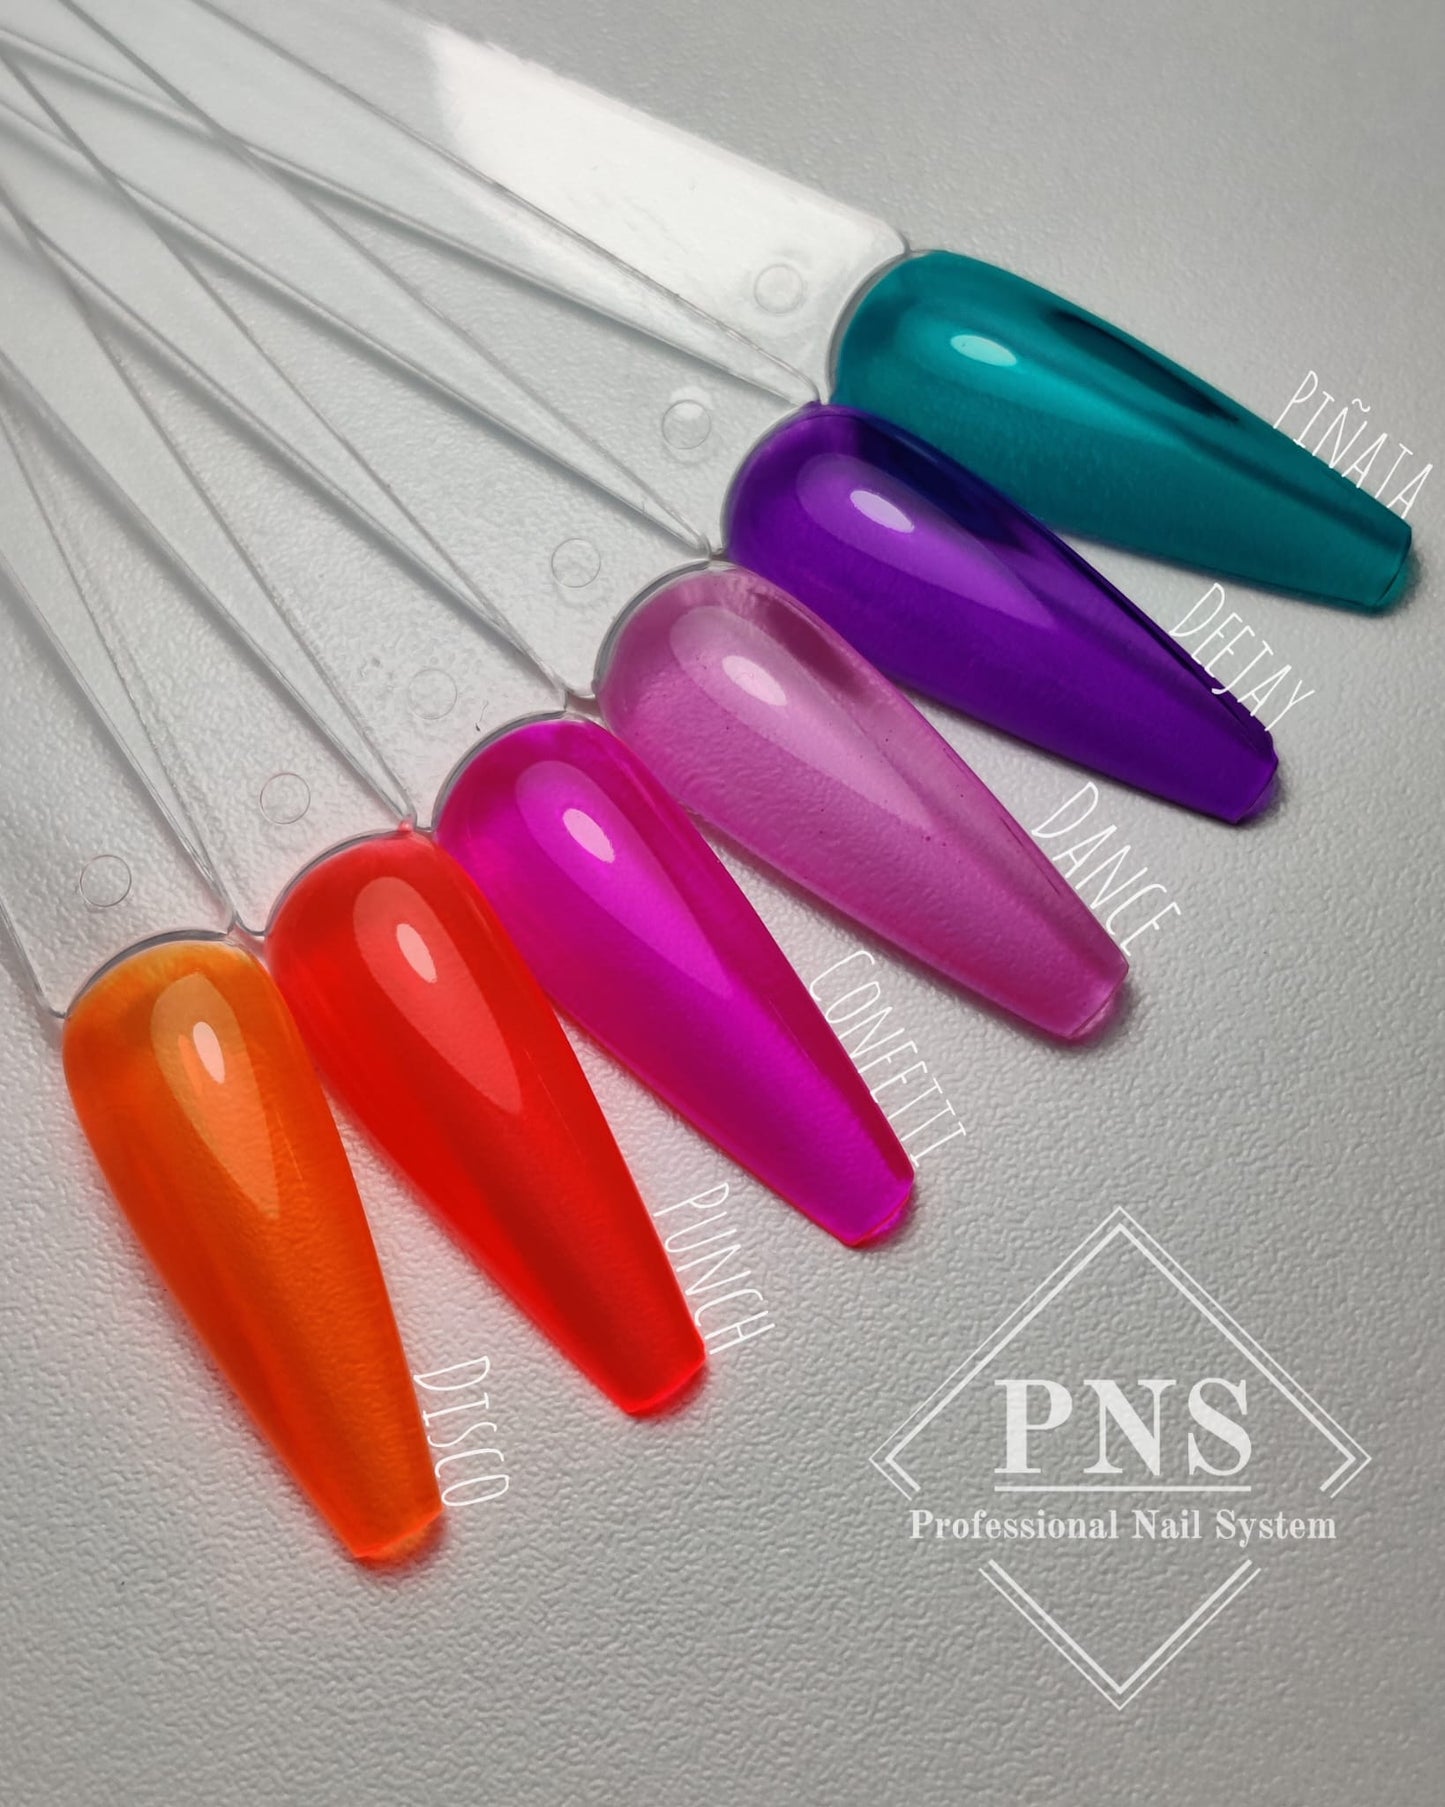 Disco PNS My Little Polish Disco Glass Gel (Party Lights collection)